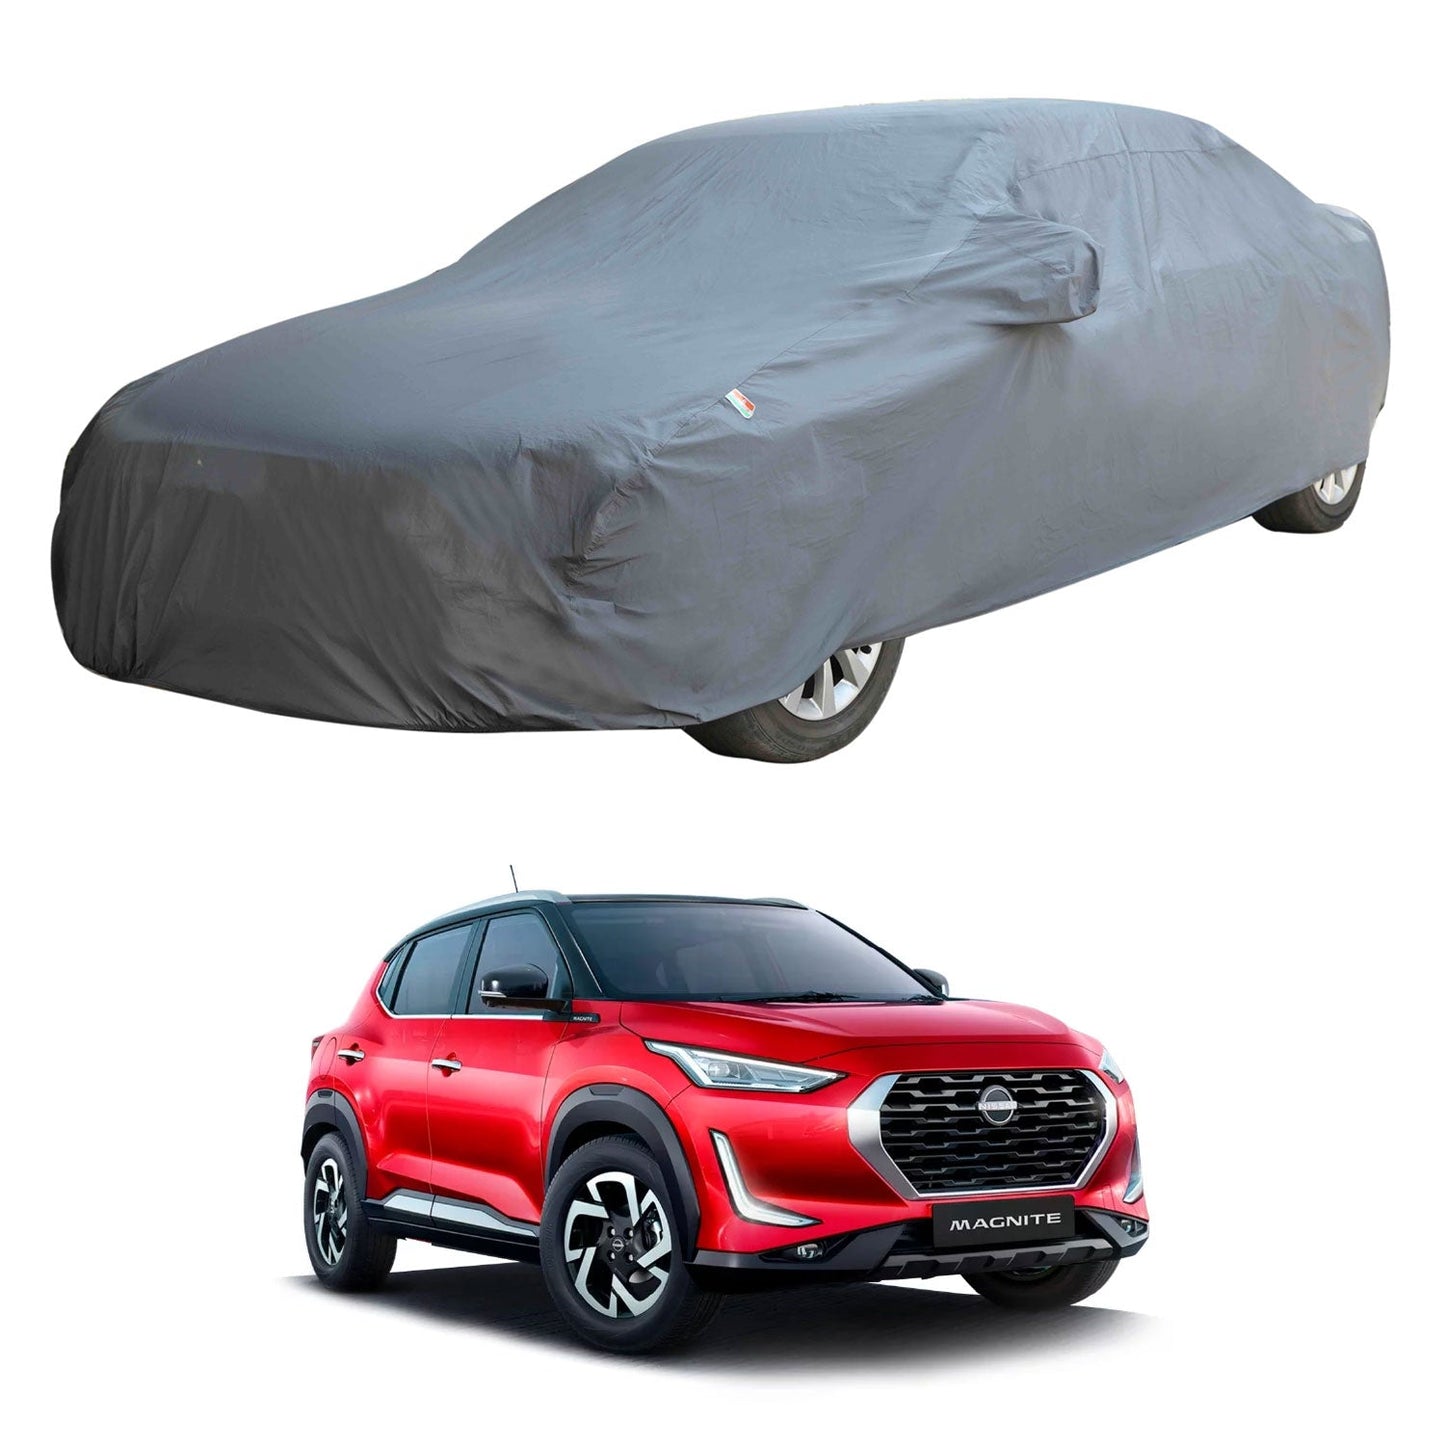 Oshotto Dark Grey 100% Anti Reflective, dustproof and Water Proof Car Body Cover with Mirror Pockets For Nissan Magnite